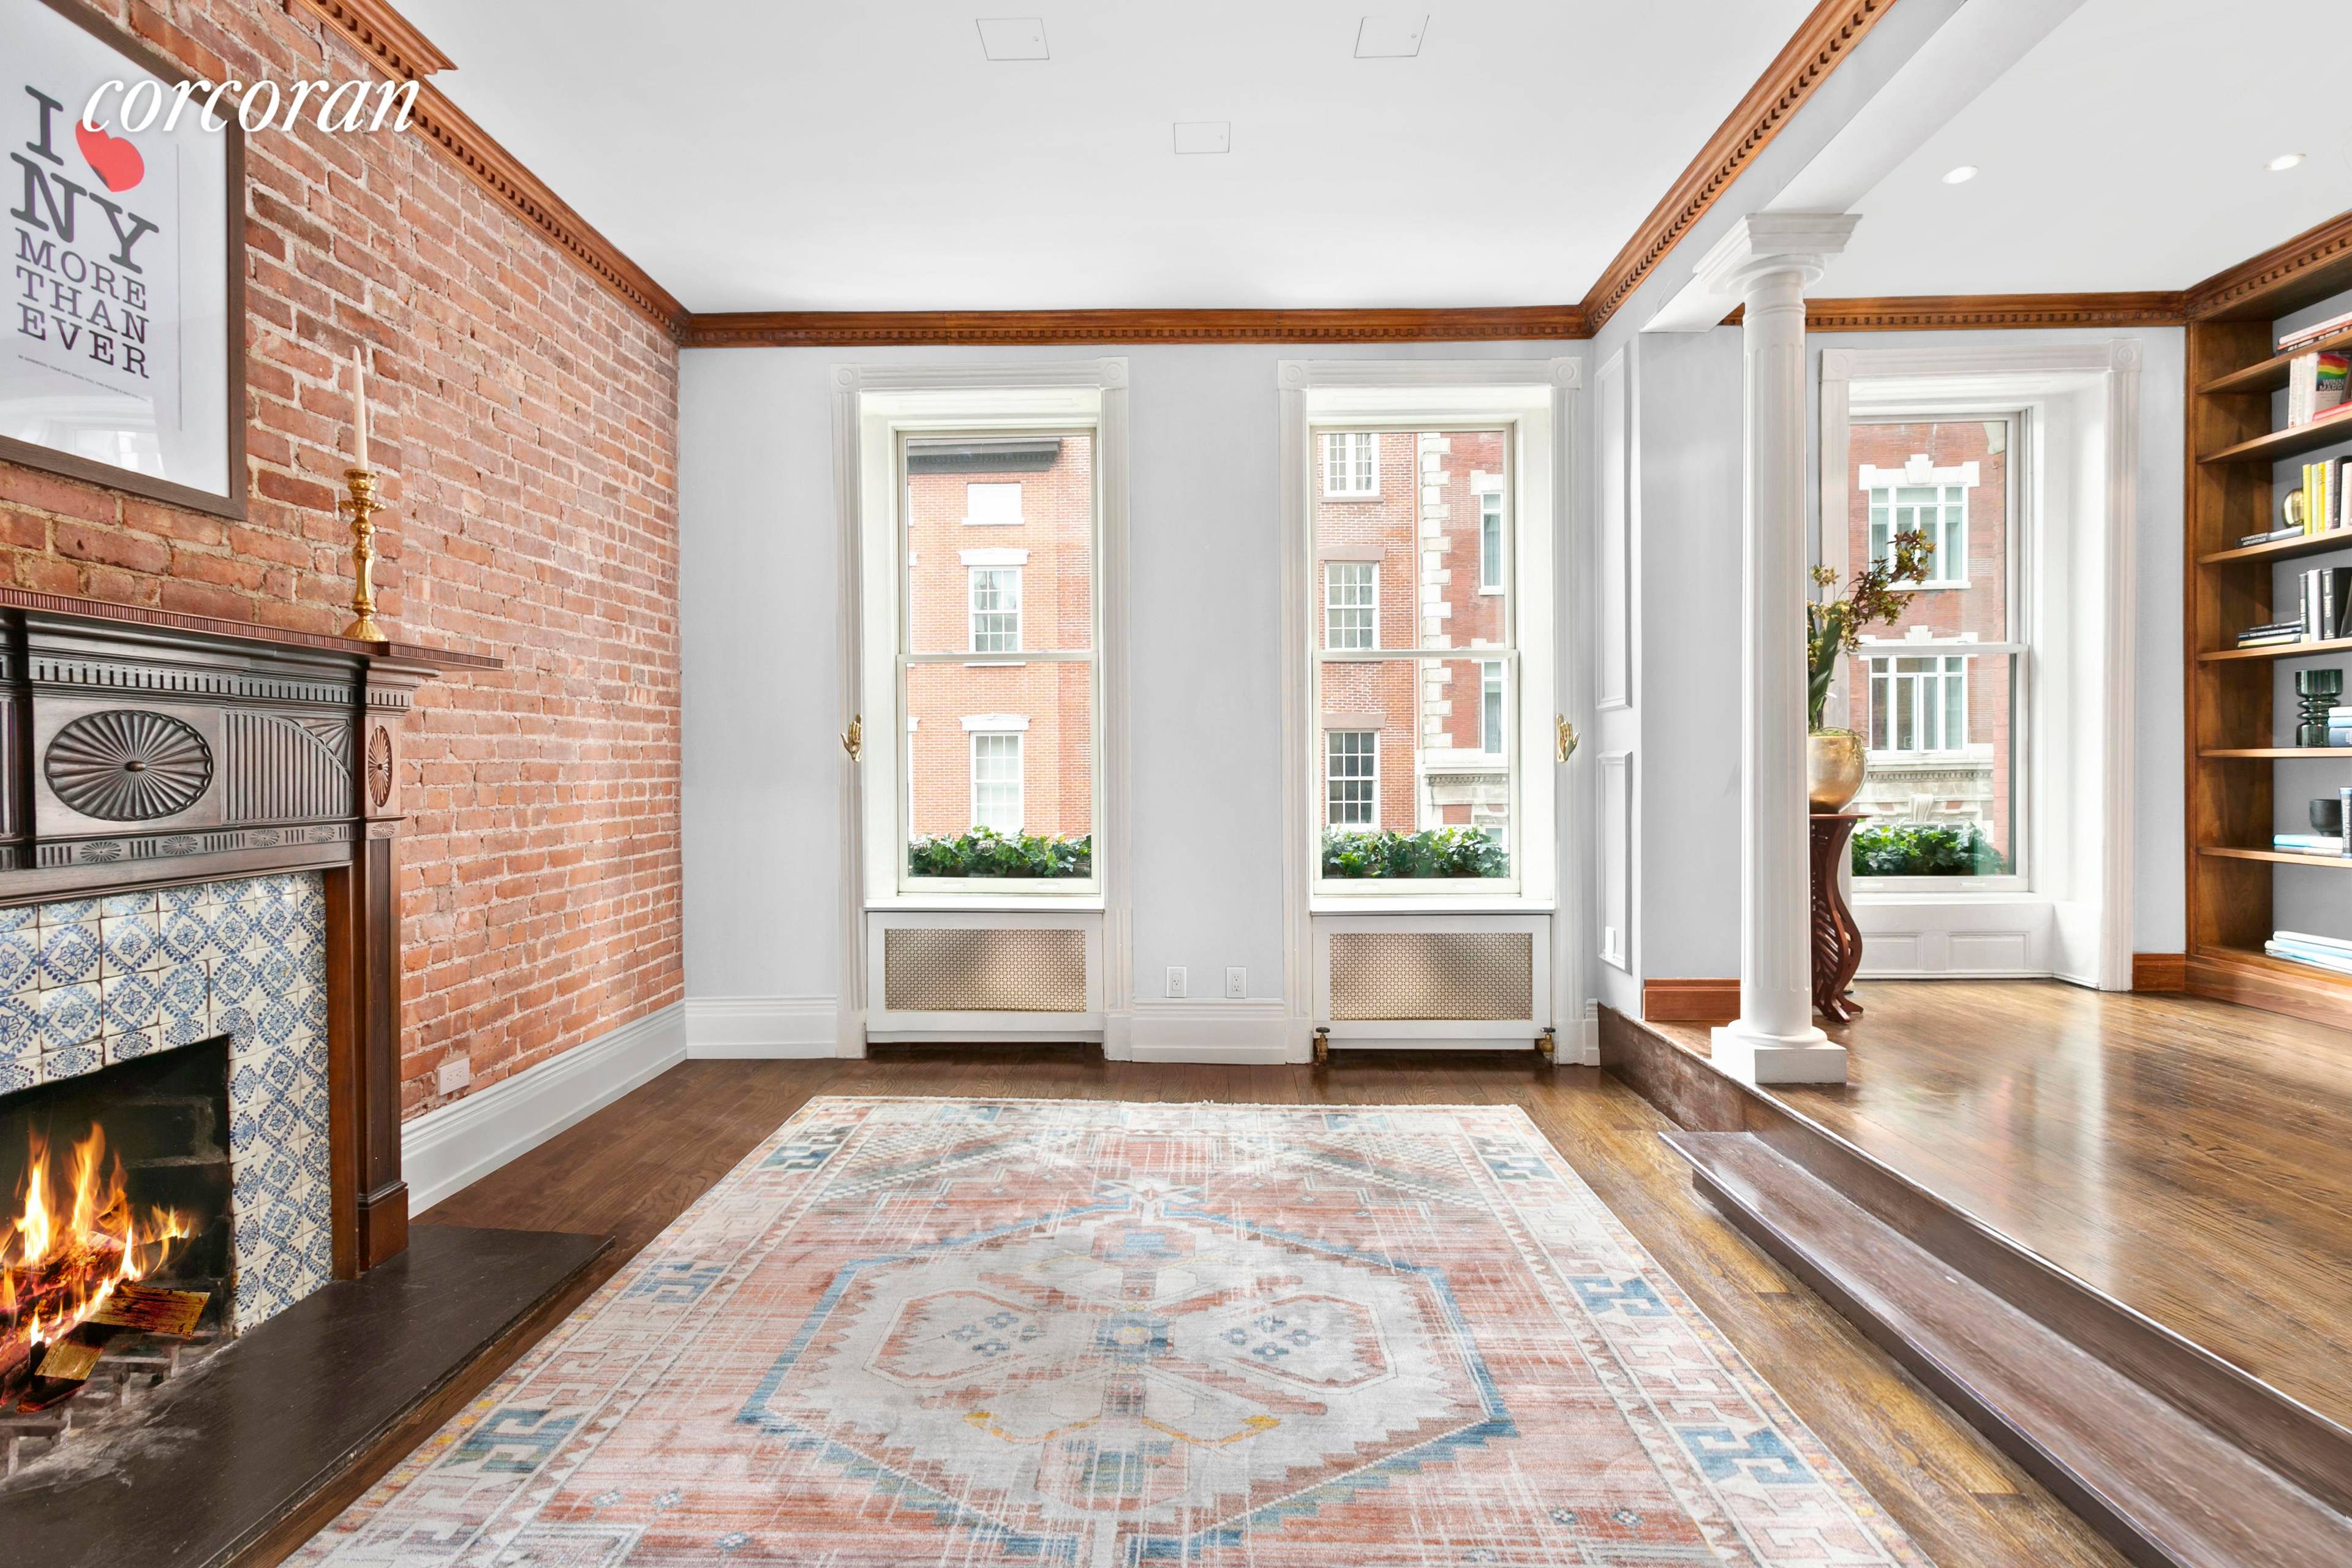 Your own floor of a prewar condominium townhouse in at the cross roads of Greenwich Village and the West Village !